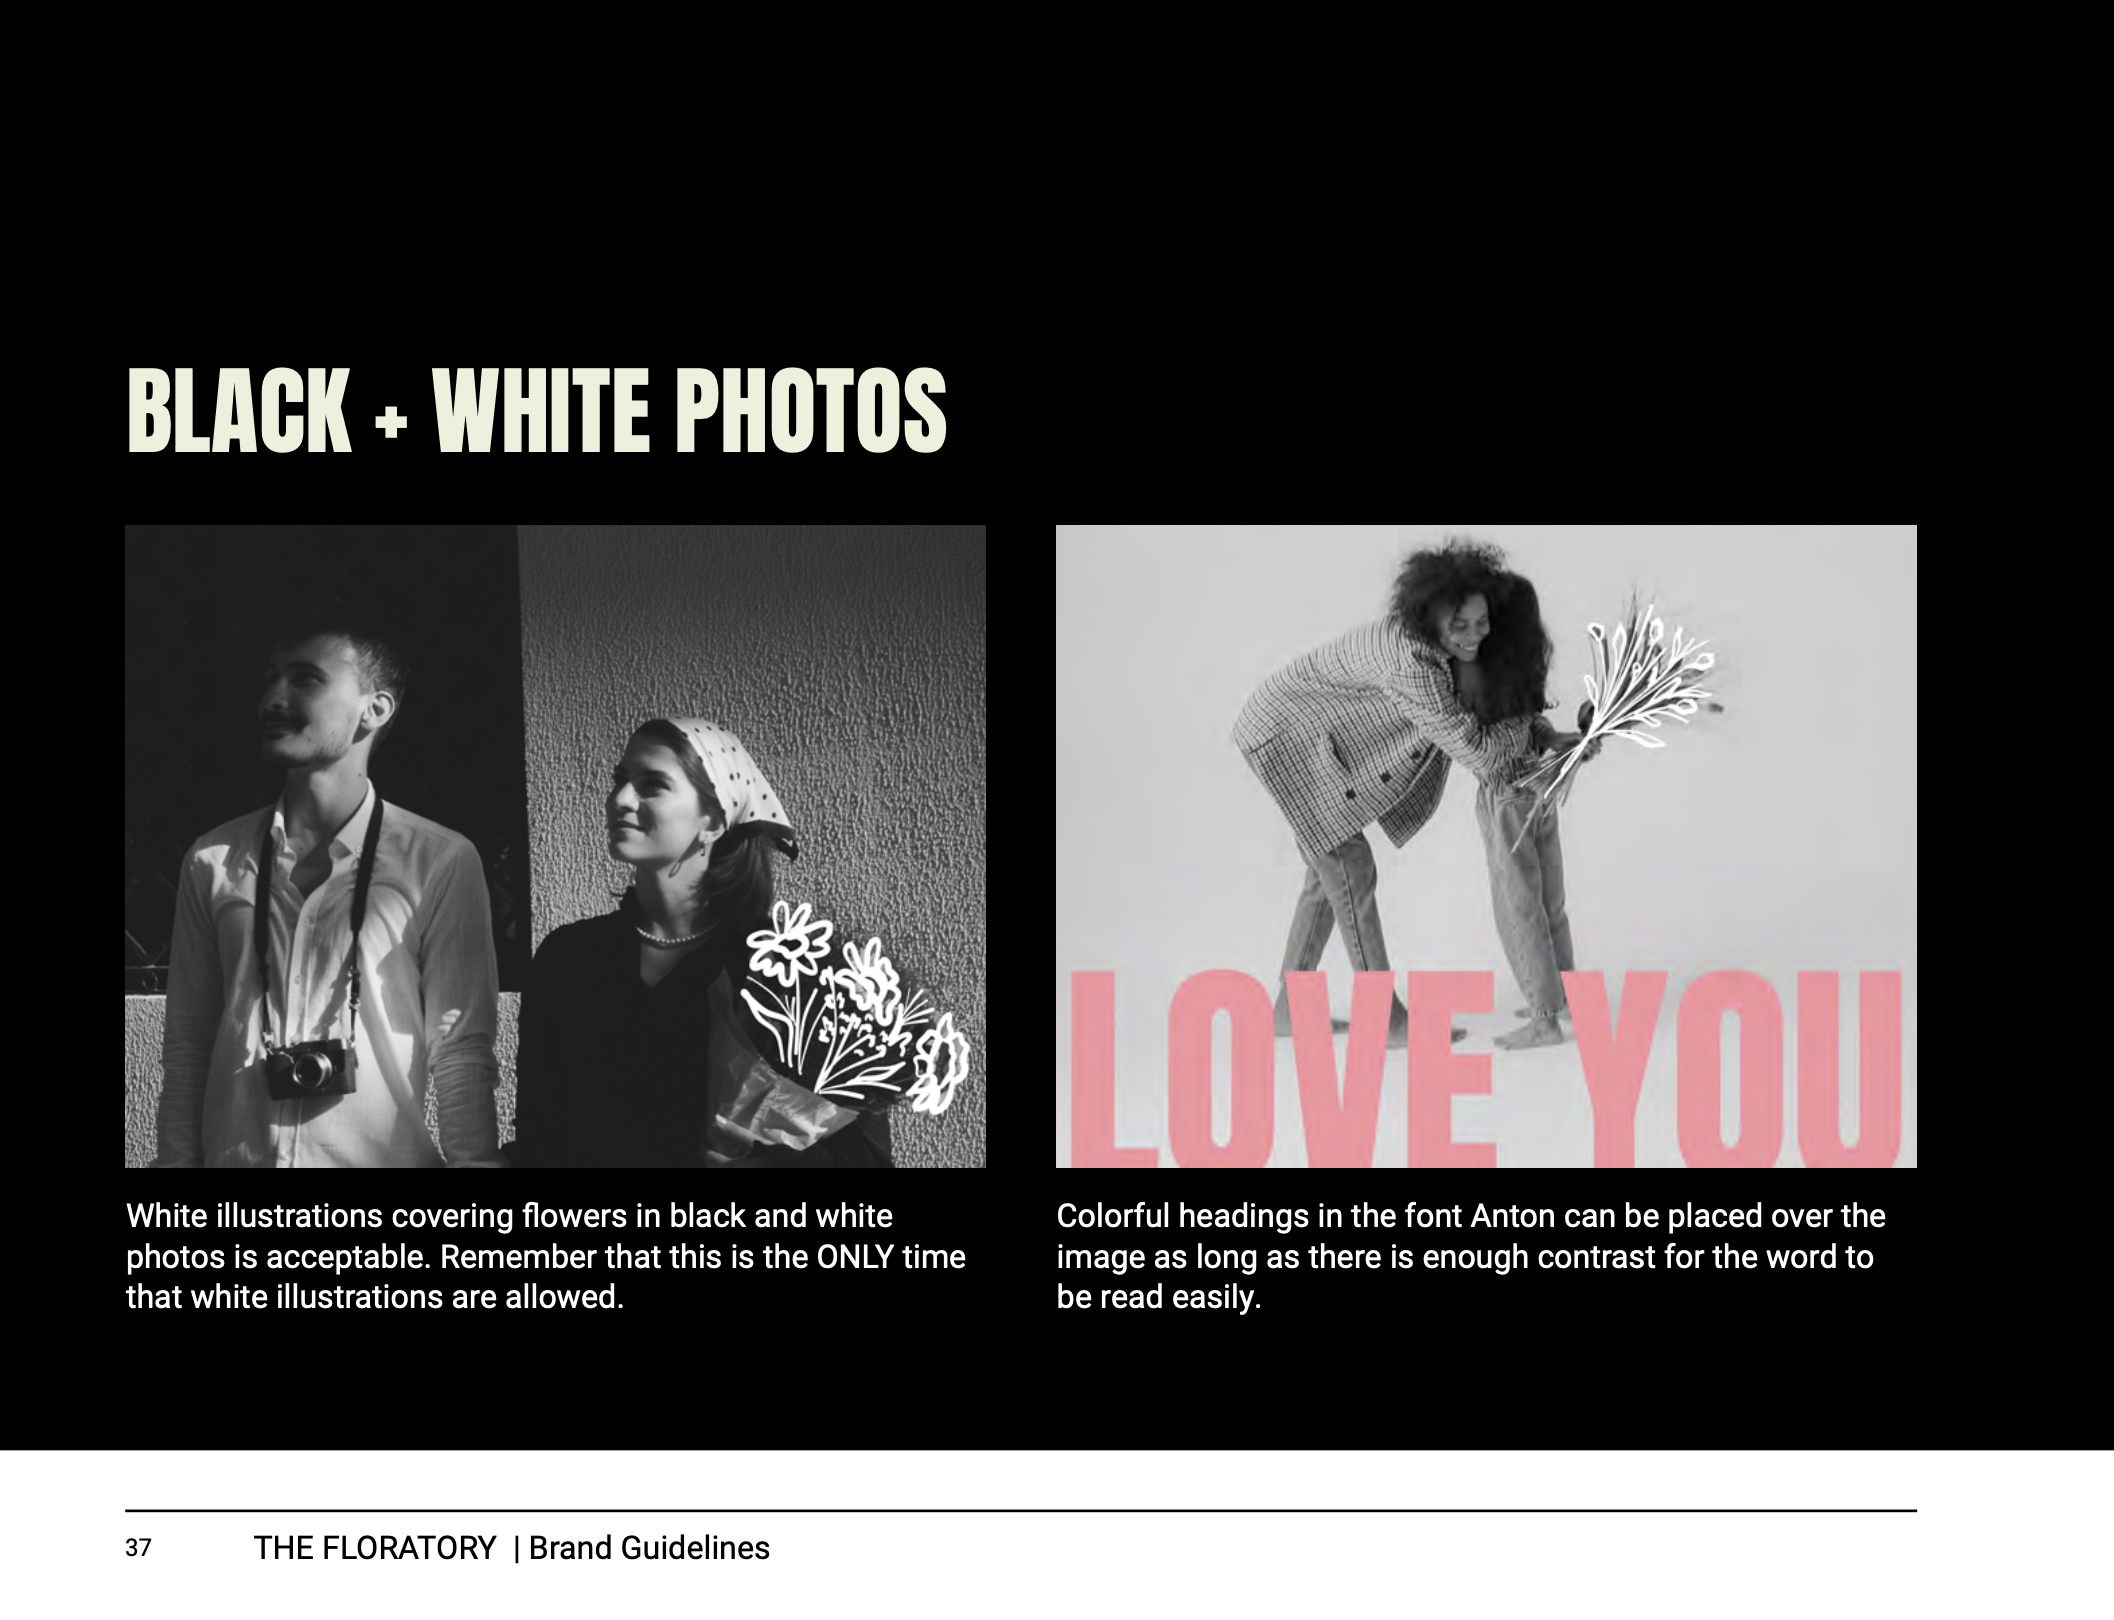  black and white photo suggestions from the floratory’s brand guidelines  